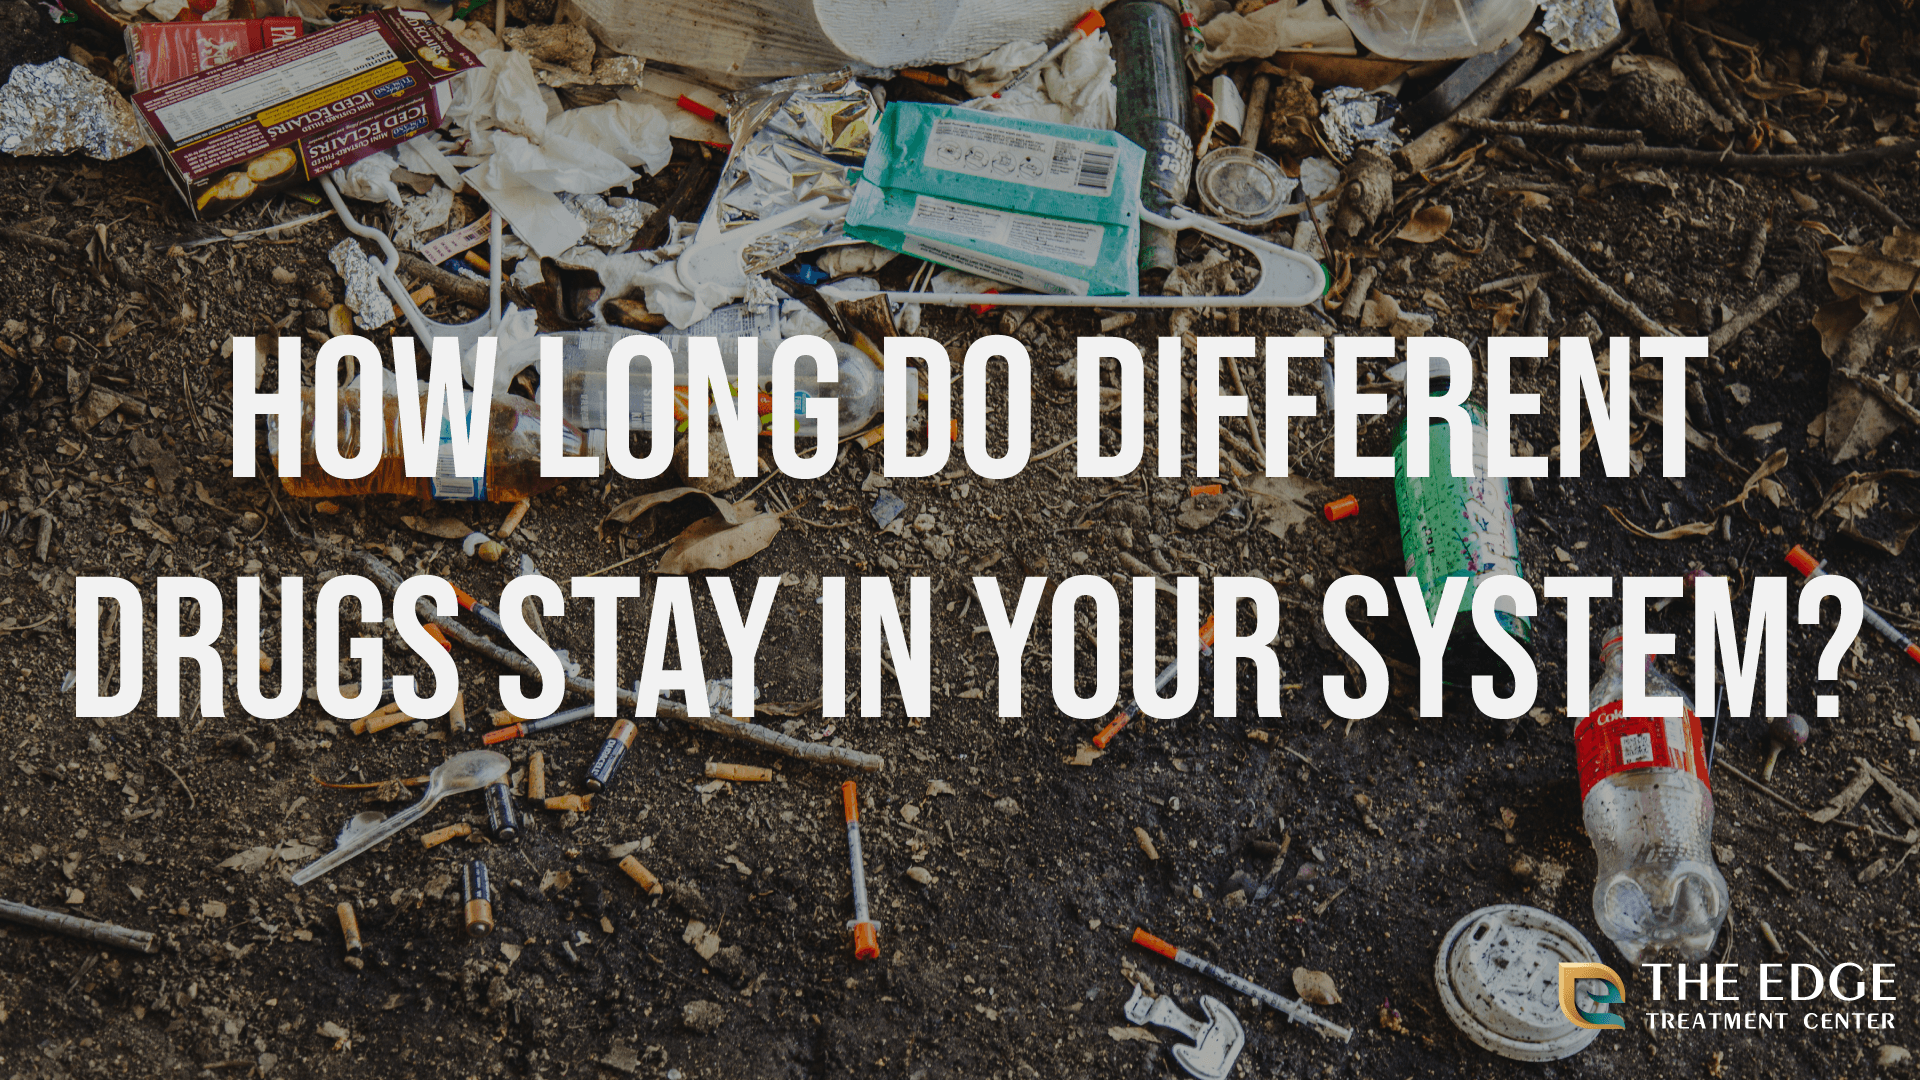 How long do different drugs stay in your system?